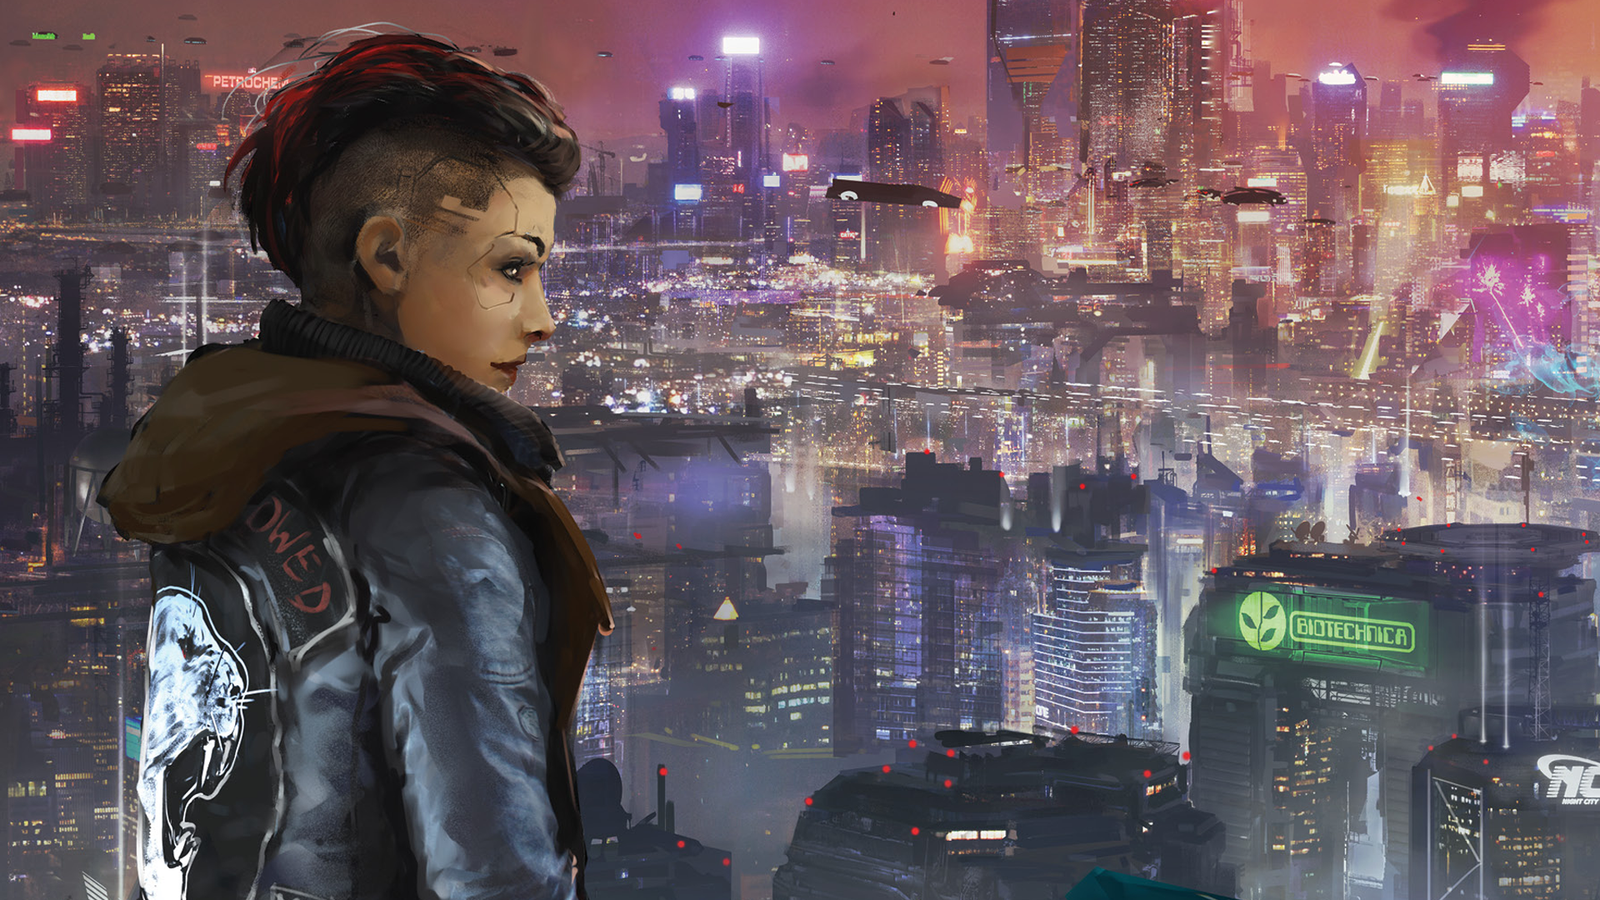 Cyberpunk Red RPG review - timeless fashion, thrills and attitude